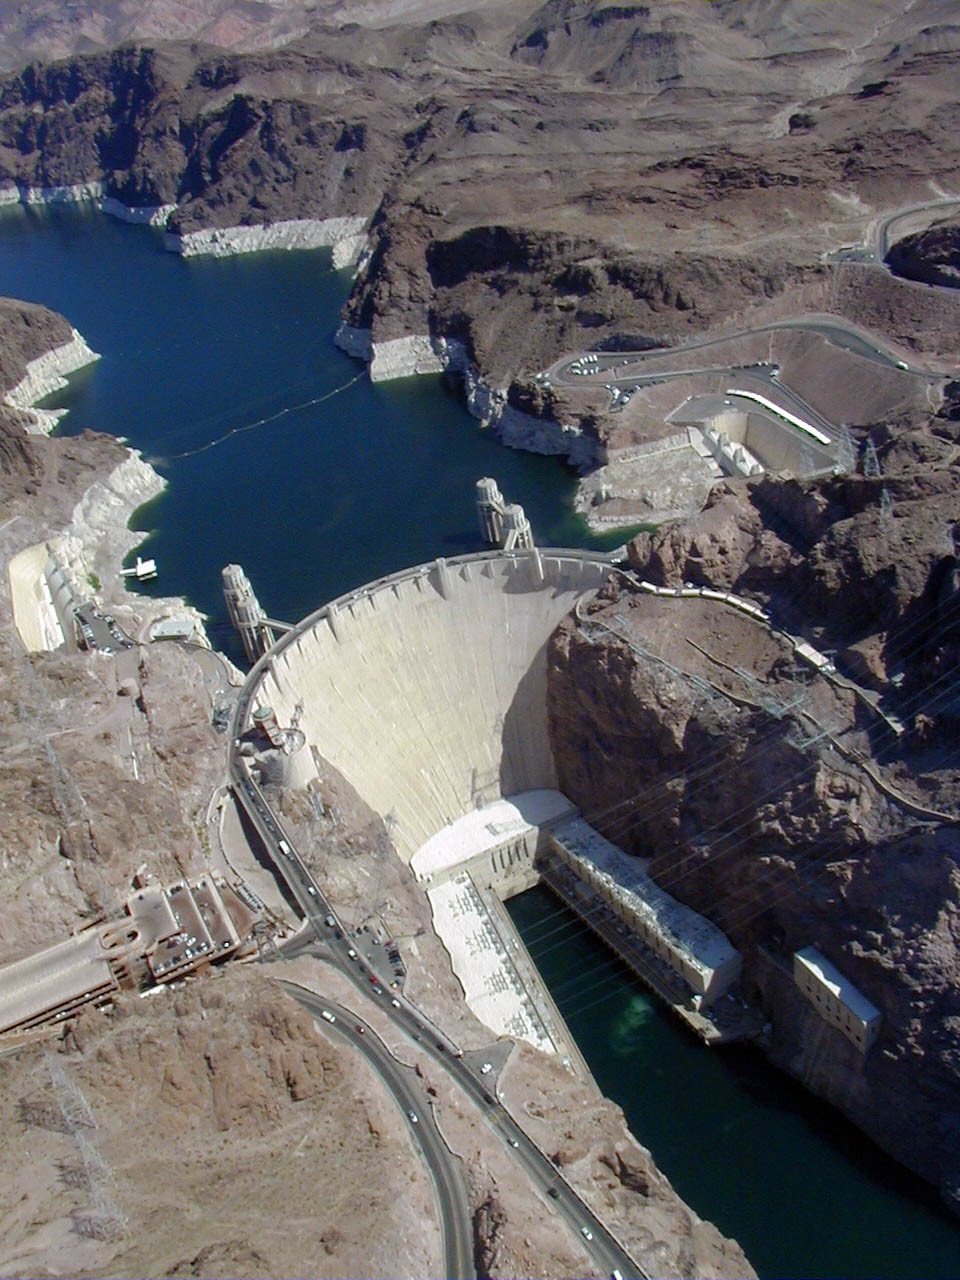 Hoover Dam in USA - Picture of Hoover Dam